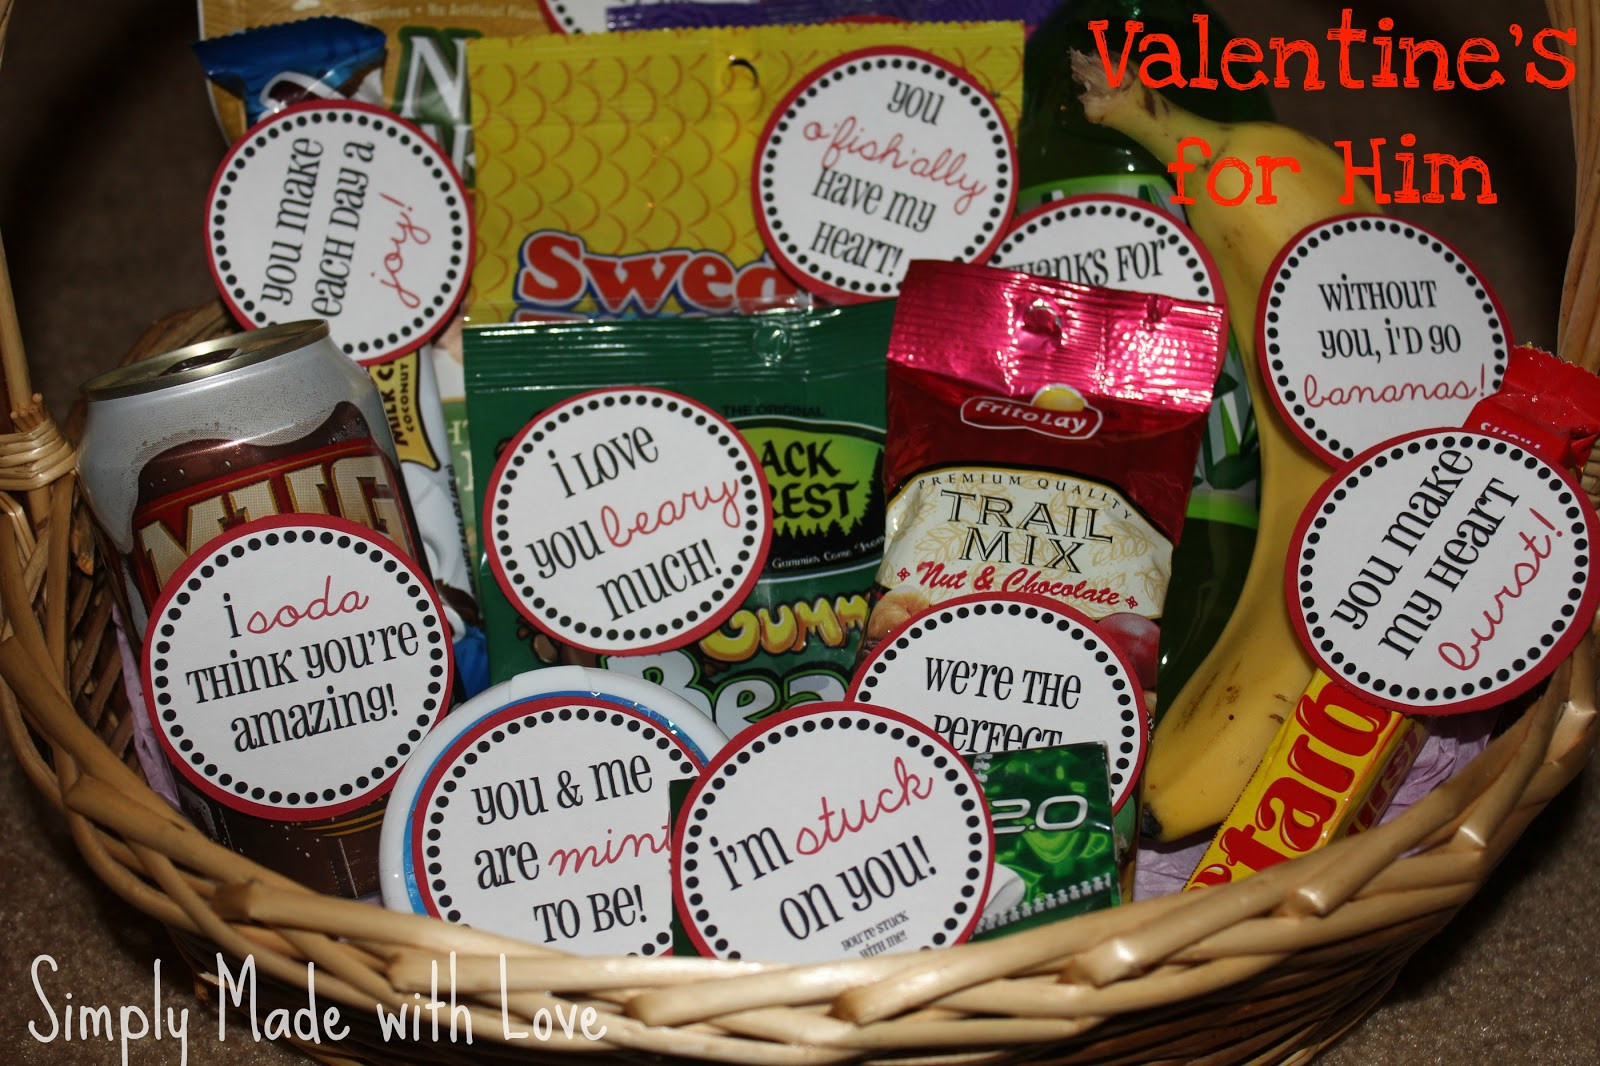 Gift Ideas For Him On Valentines
 simply made with love Valentine s for Him & Free Printable